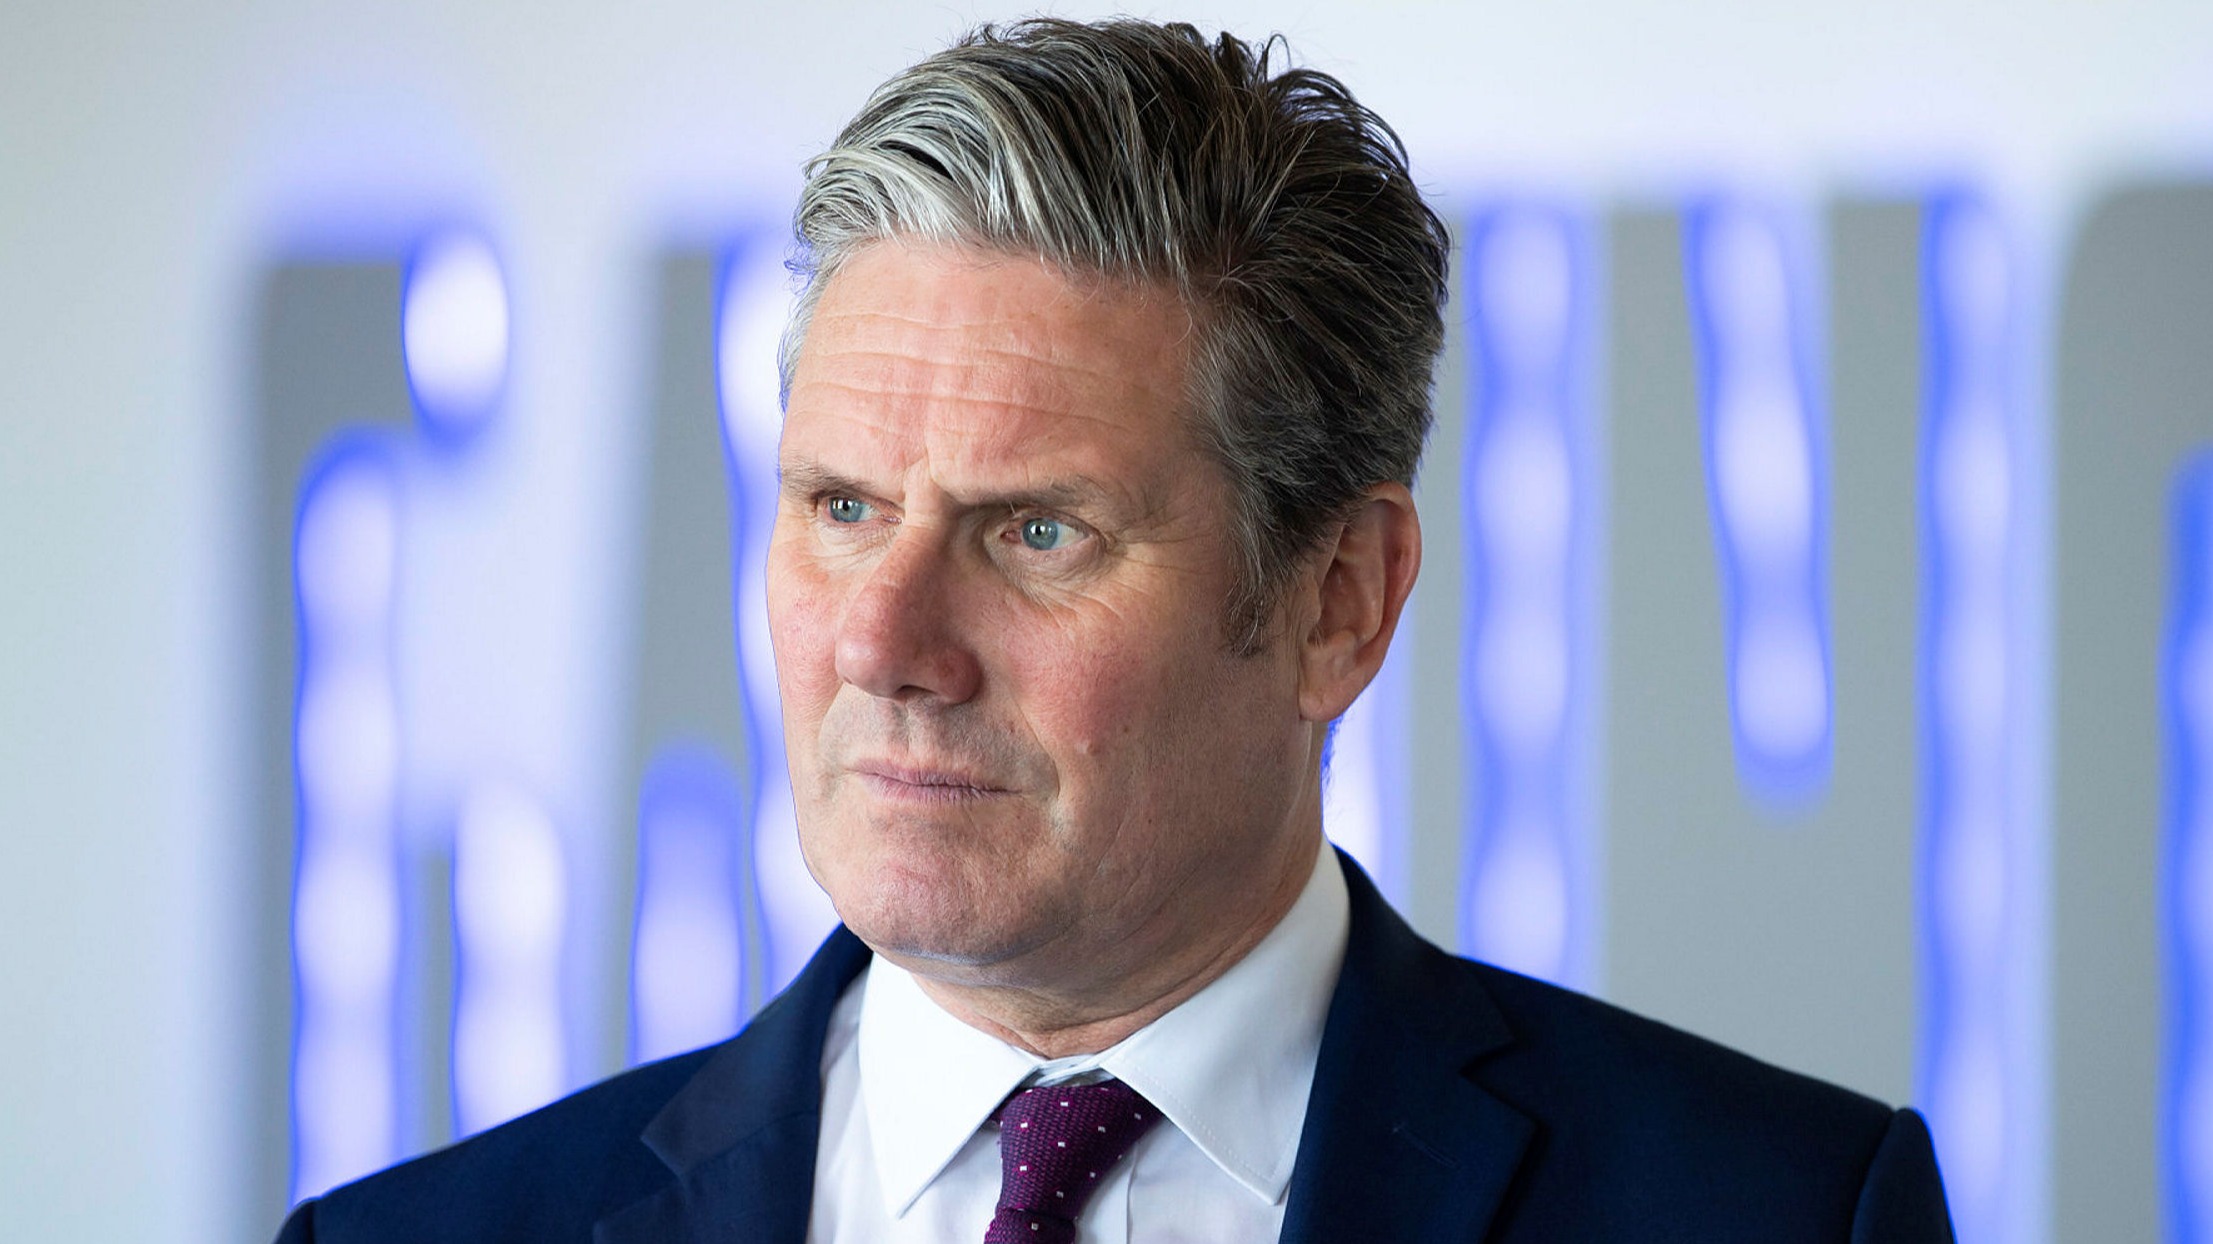 Keir Starmer The Road Ahead Essay All the key Themes and Messages!